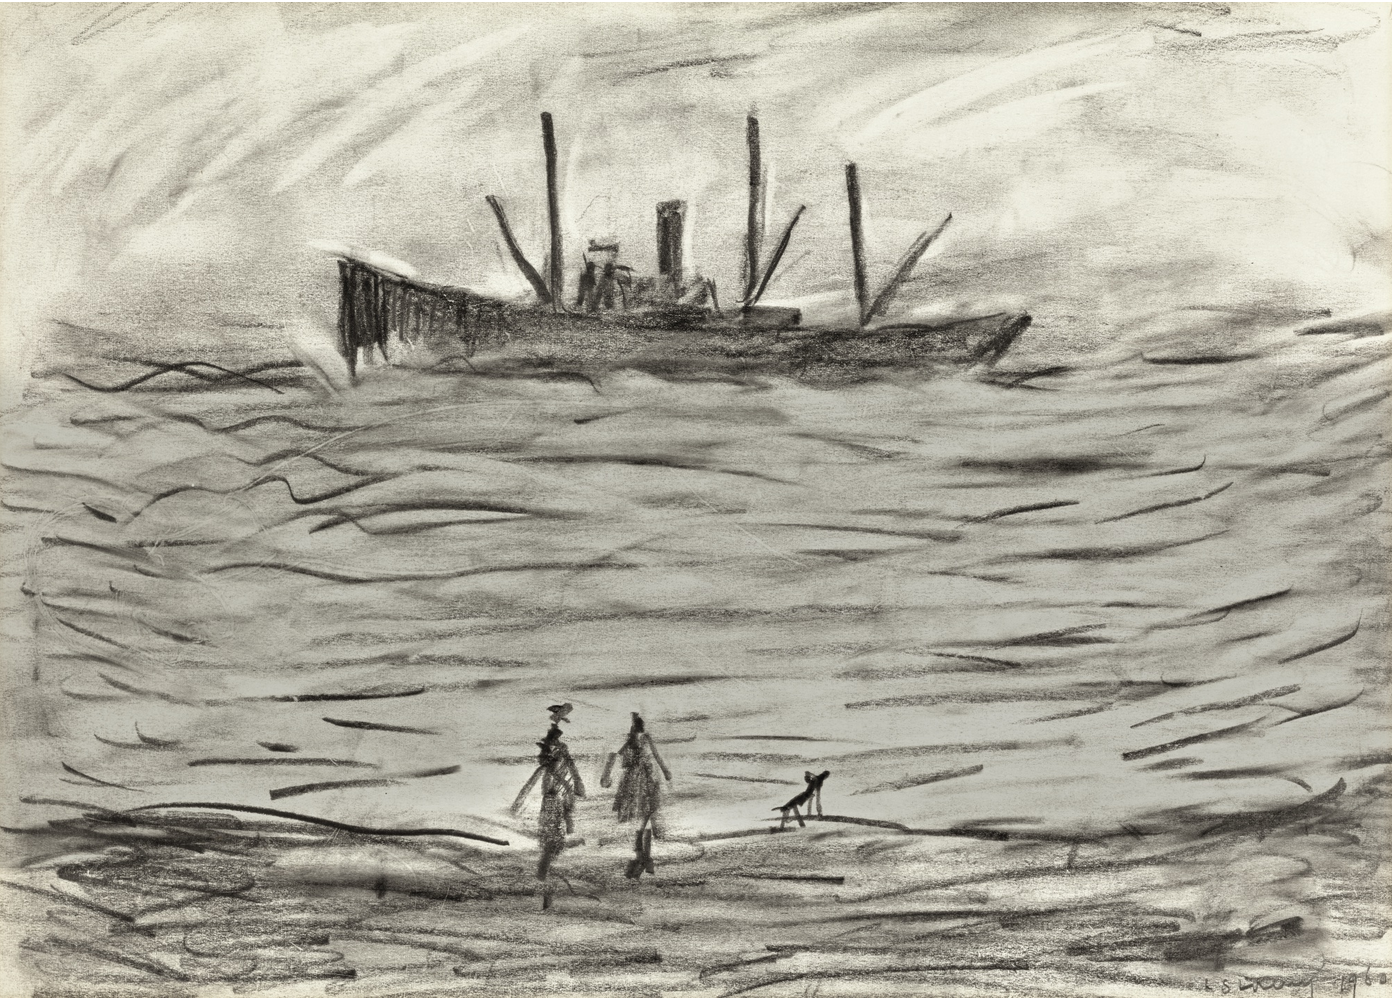 Trawler in a rough sea (1960) by Laurence Stephen Lowry (1887 - 1976), English artist.